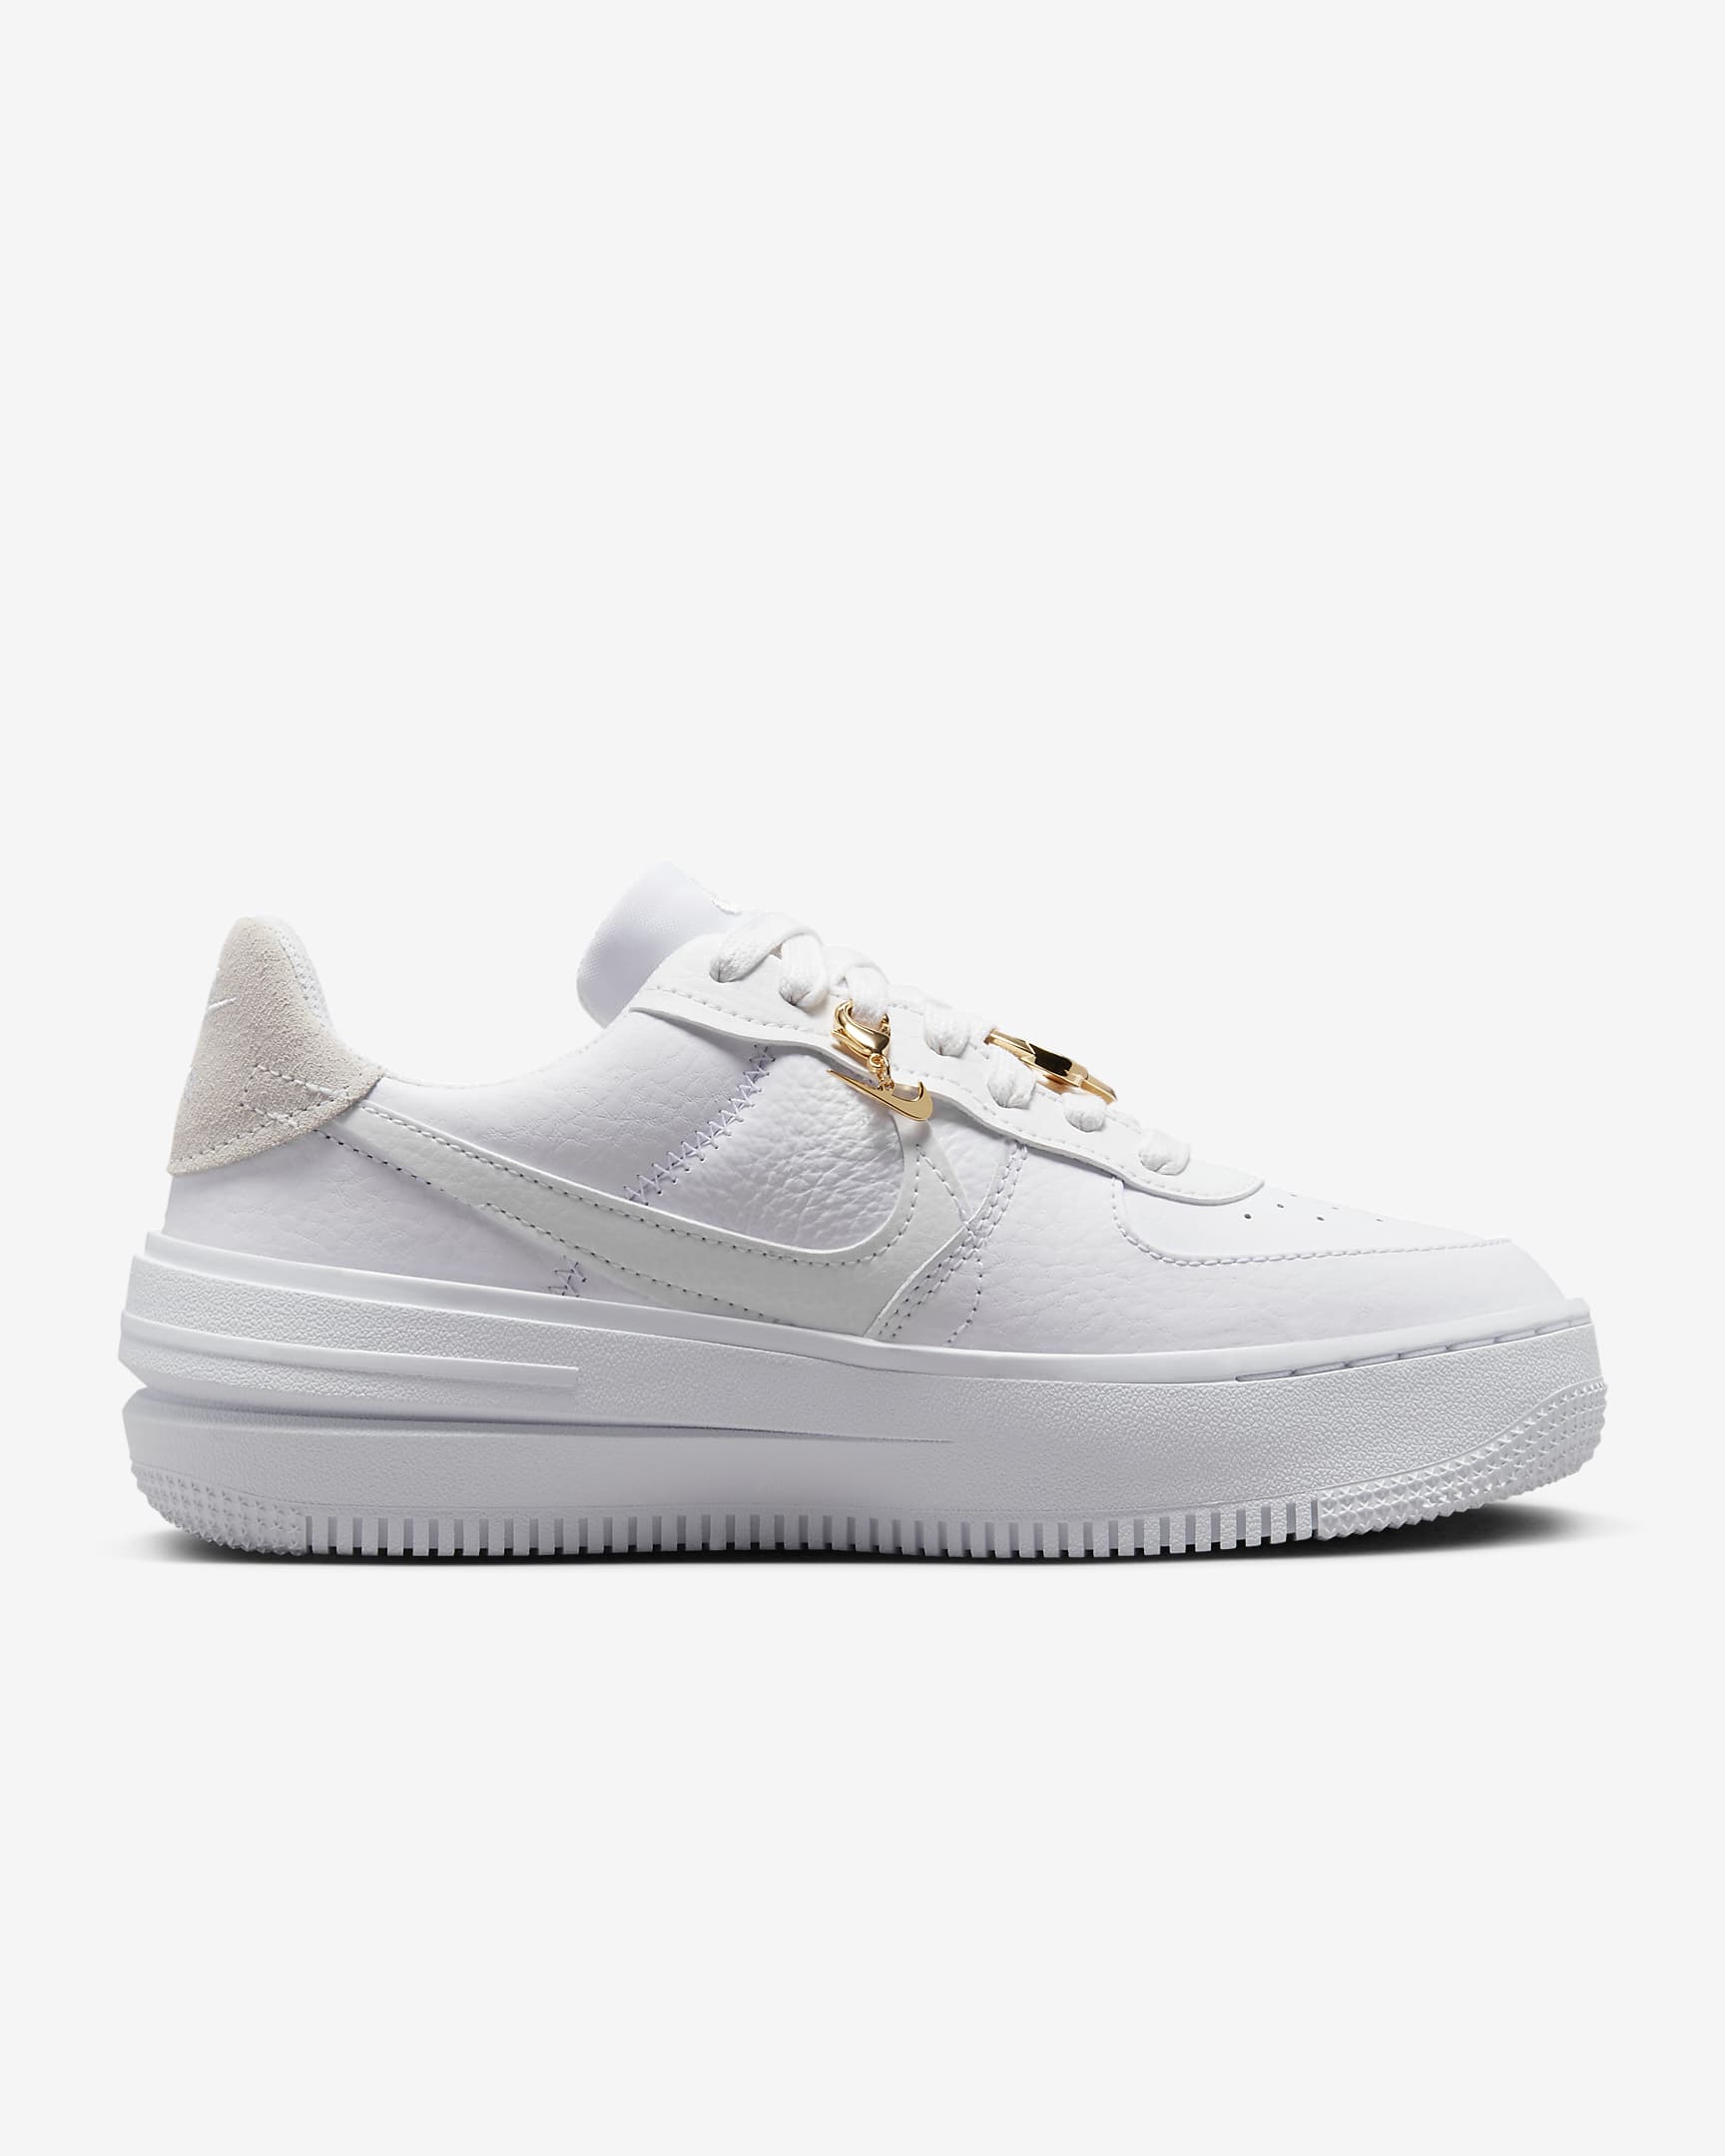 Nike Air Force 1 Low PLT.AF.ORM Women's Shoes. Nike HR